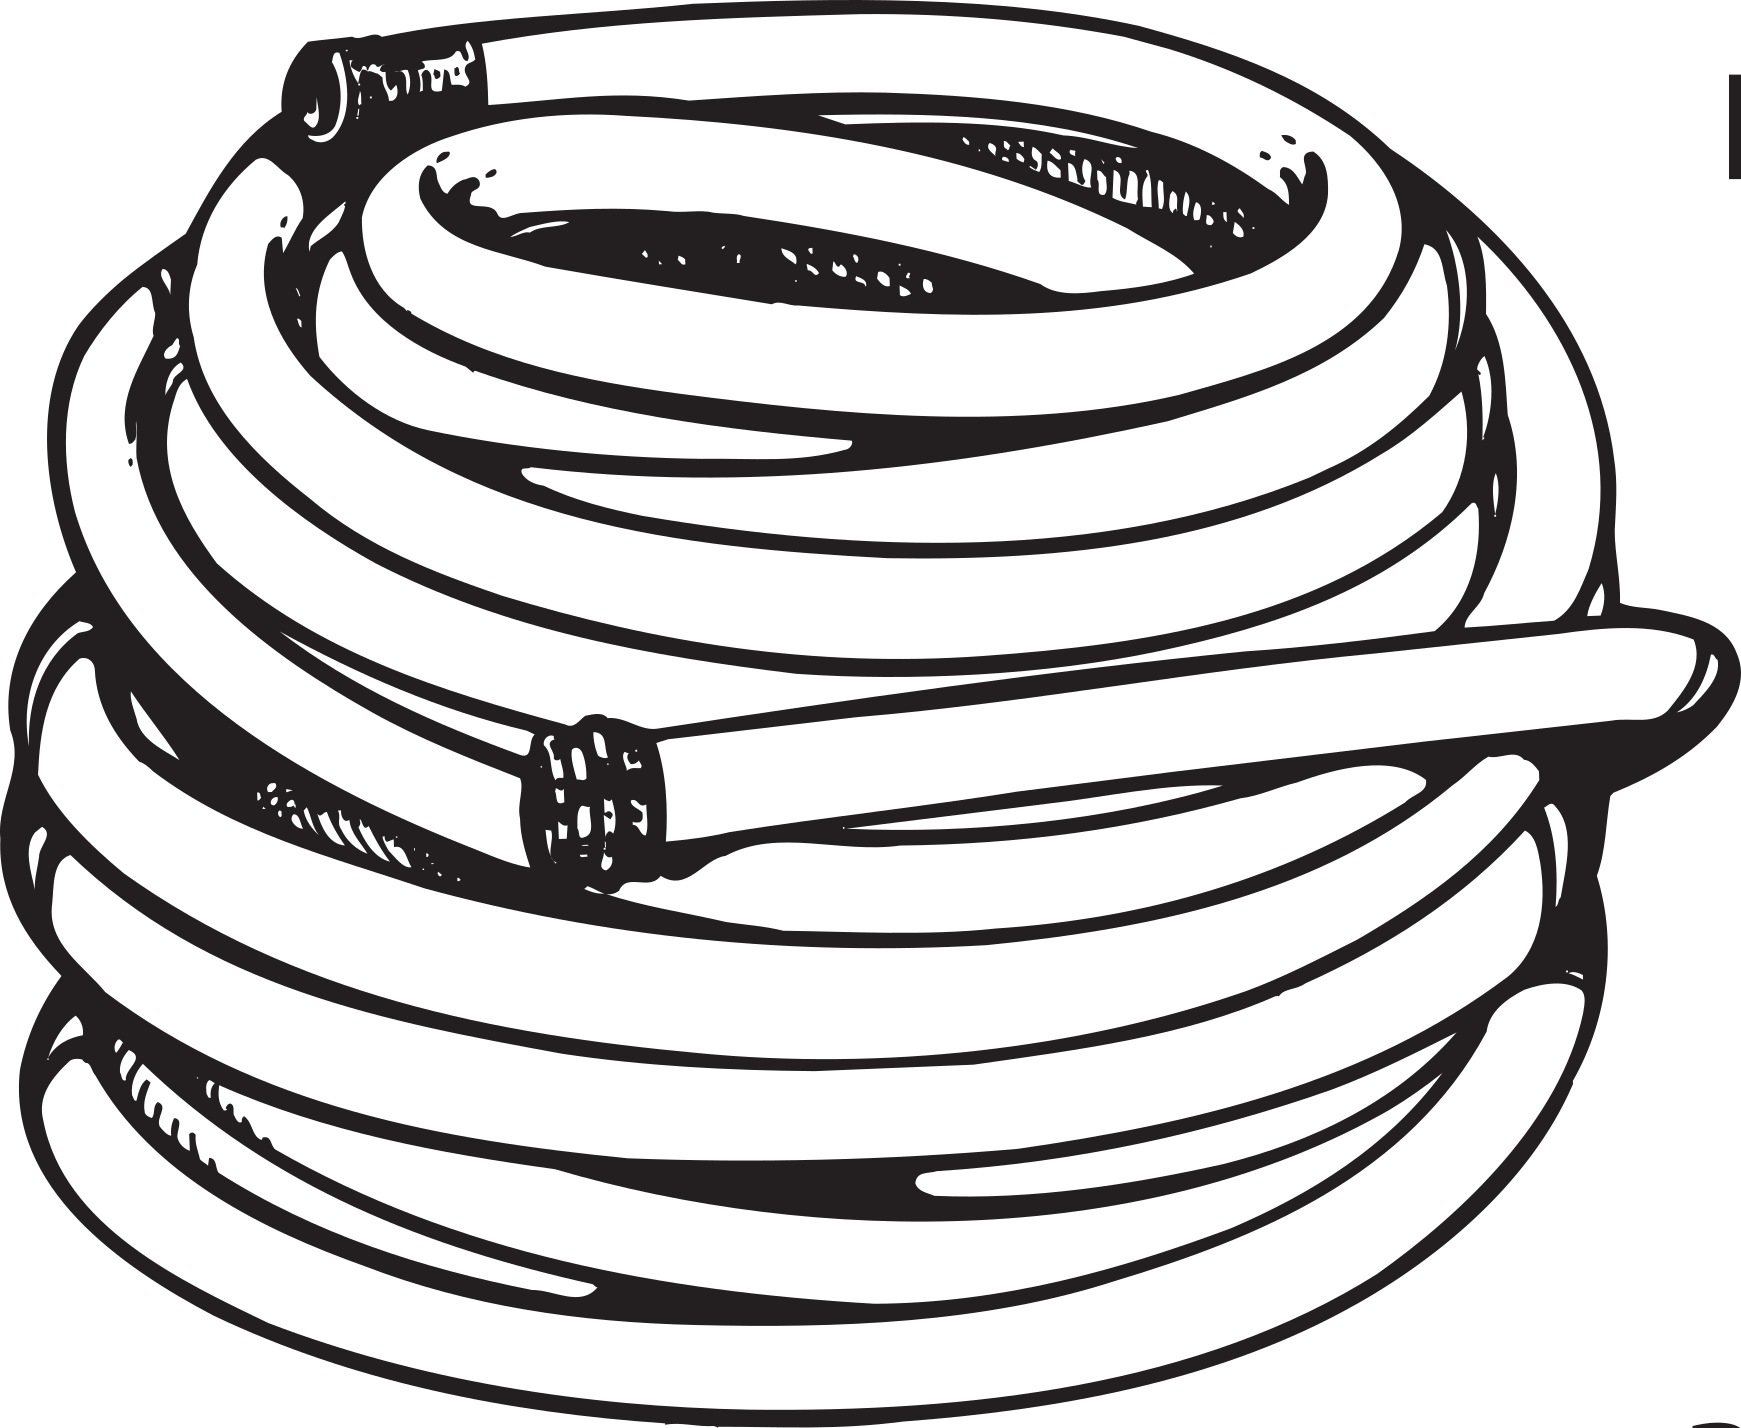 Circular tubing with nozzle ends